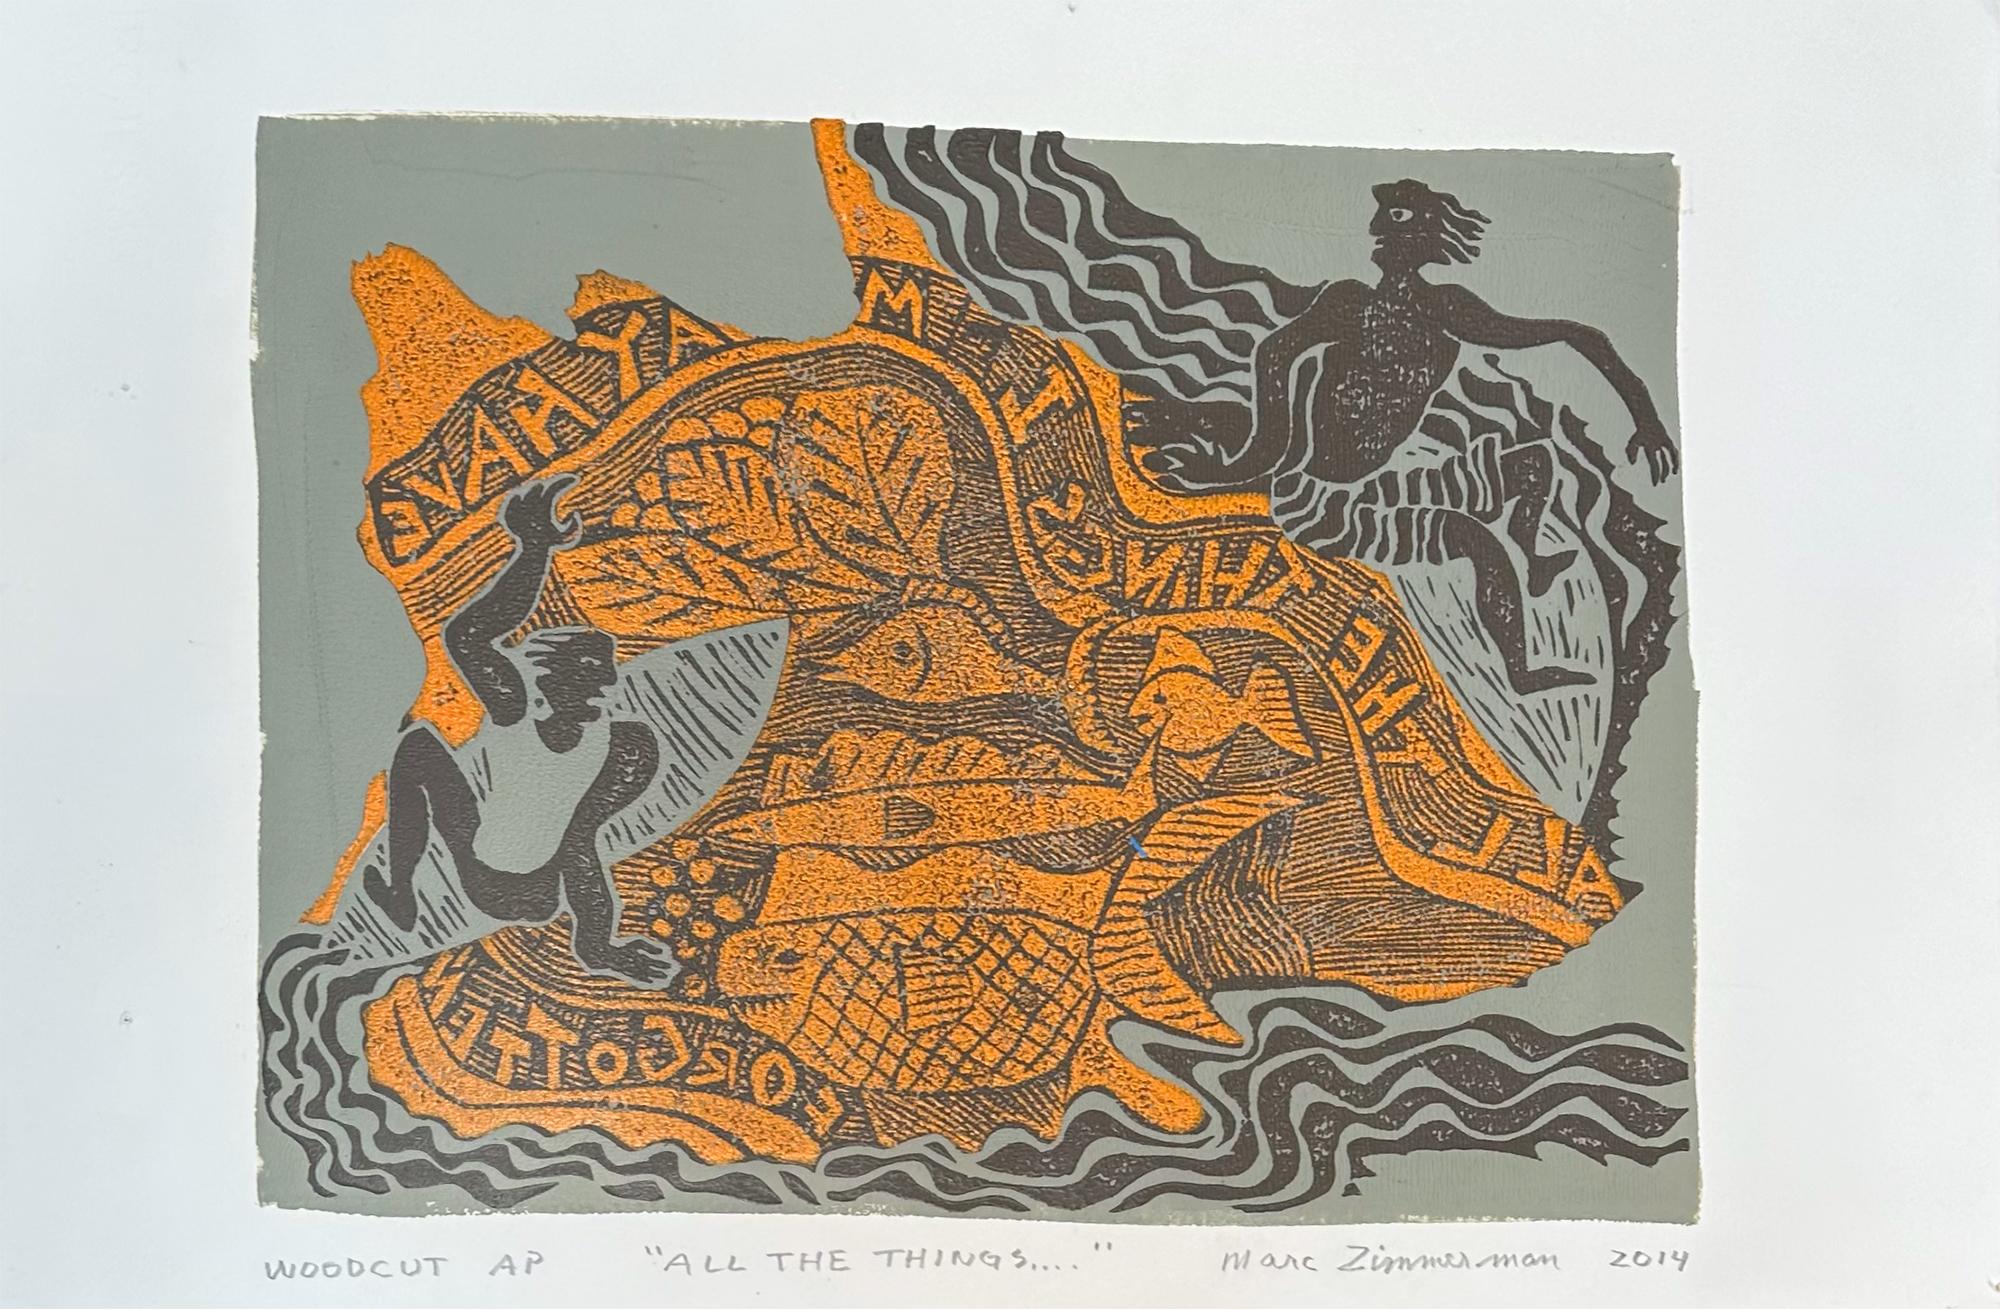 All The Things - Surfing Art - Figurative - Woodcut Print By Marc Zimmerman

Limited Edition 01/04

This masterwork is exhibited in the Zimmerman Gallery, Carmel CA.

Immerse yourself in the captivating world of surfing and ocean vibes with Marc